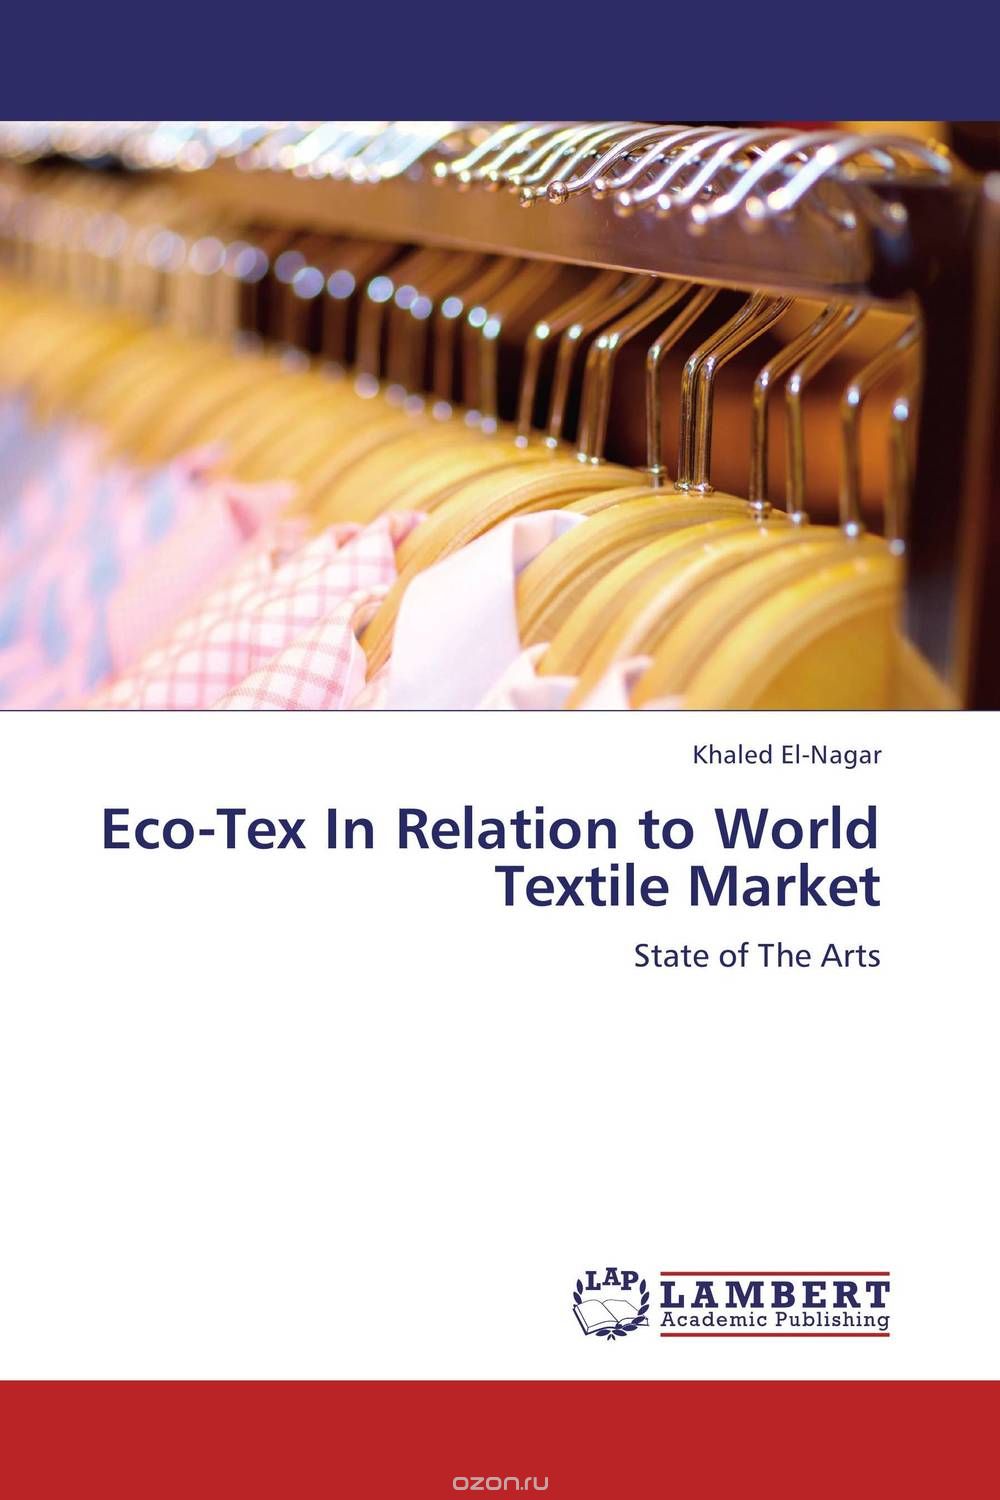 Eco-Tex In Relation to World Textile Market